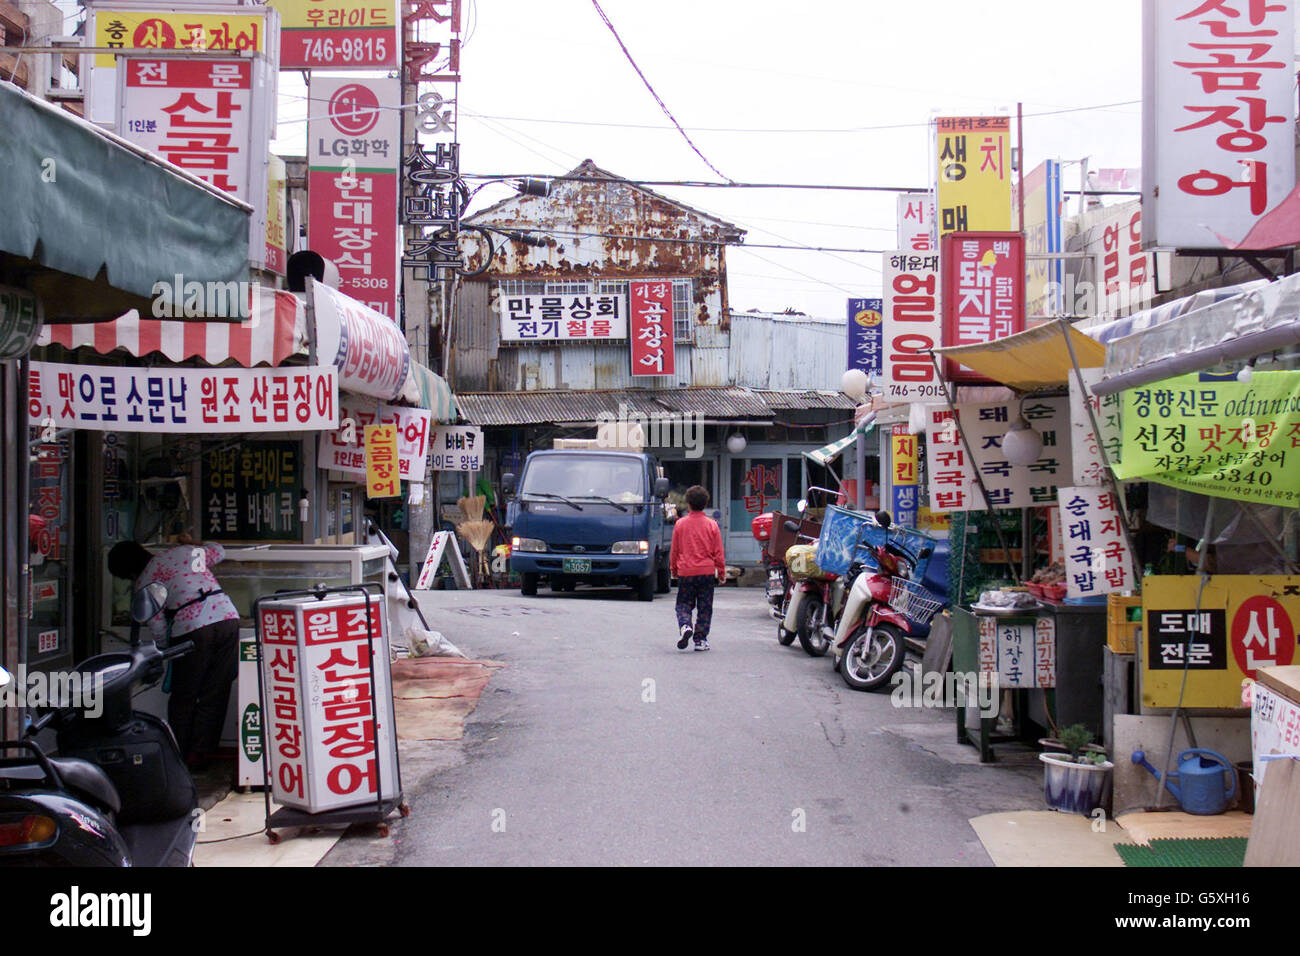 Small shops and market stalls line this street in Busan where the buildings are covered in various signs and adverts. Stock Photo